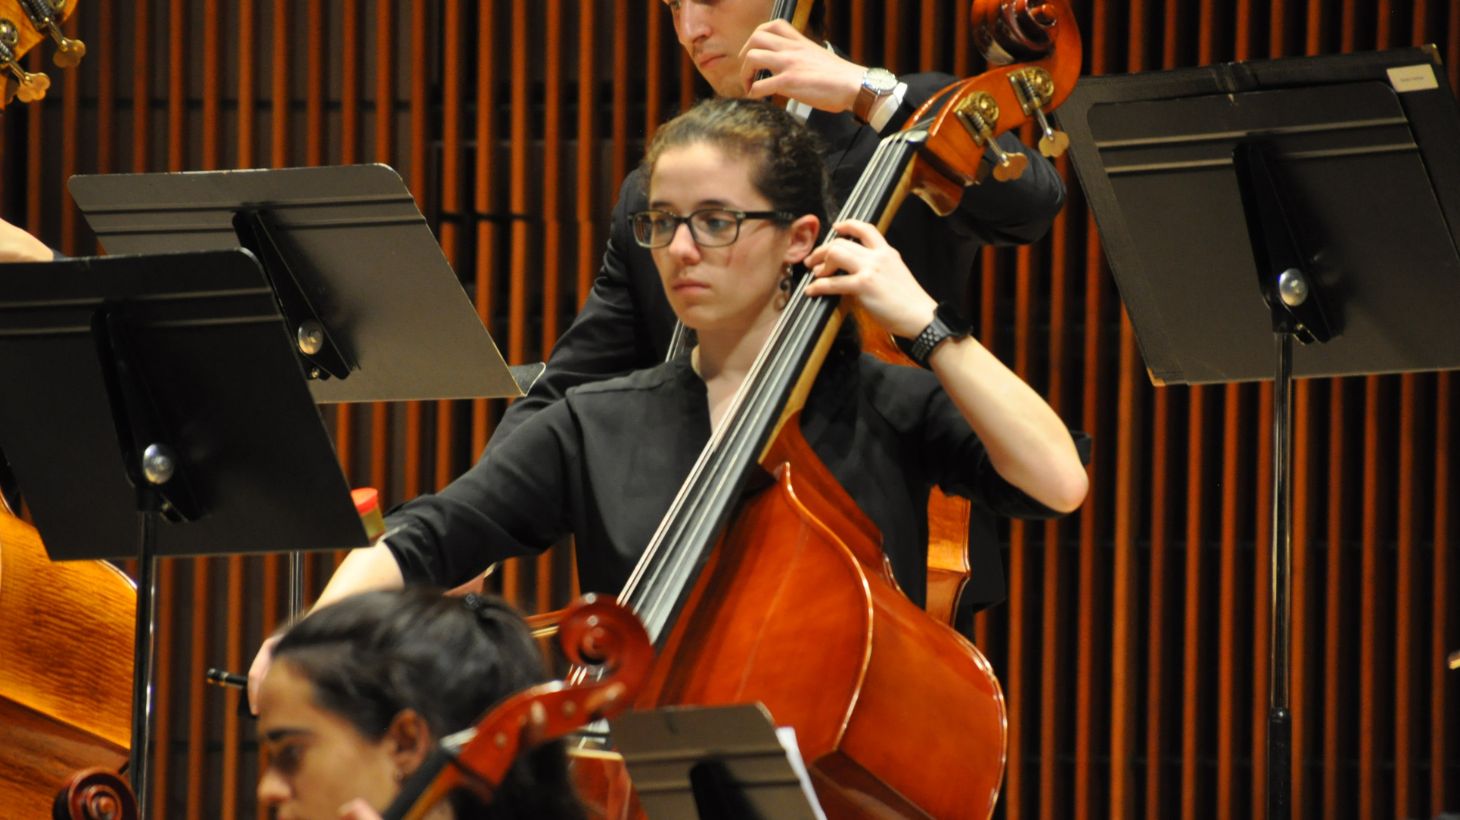 A woman plays the cello on stage.